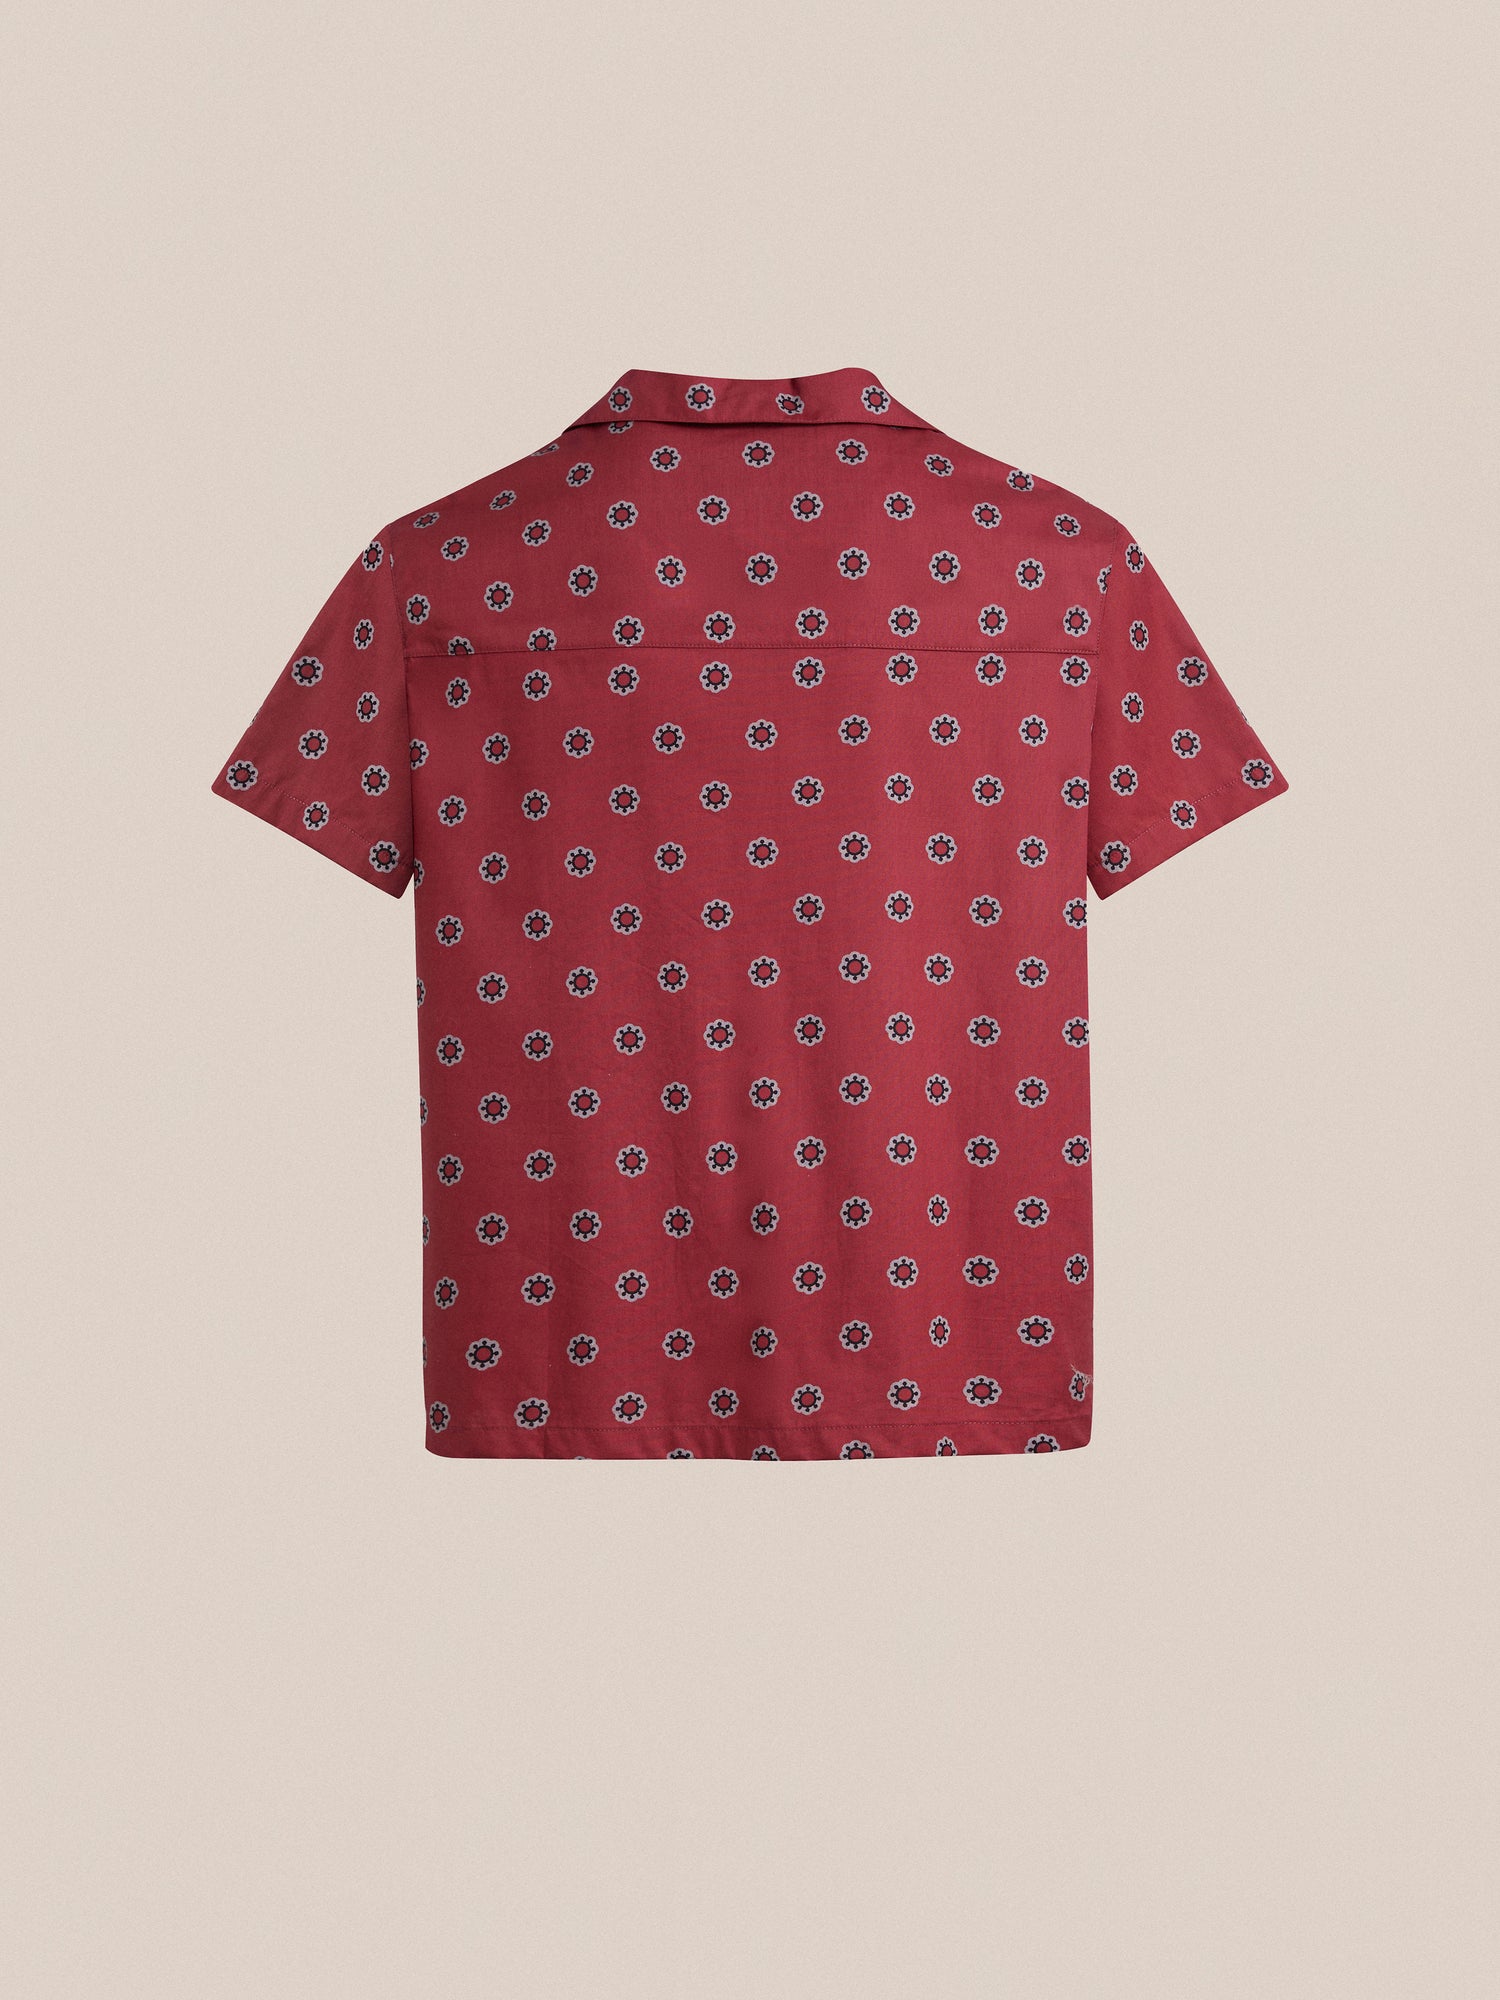 A short sleeve camp shirt with a Red Motif SS Camp Shirt floral pattern by Found.